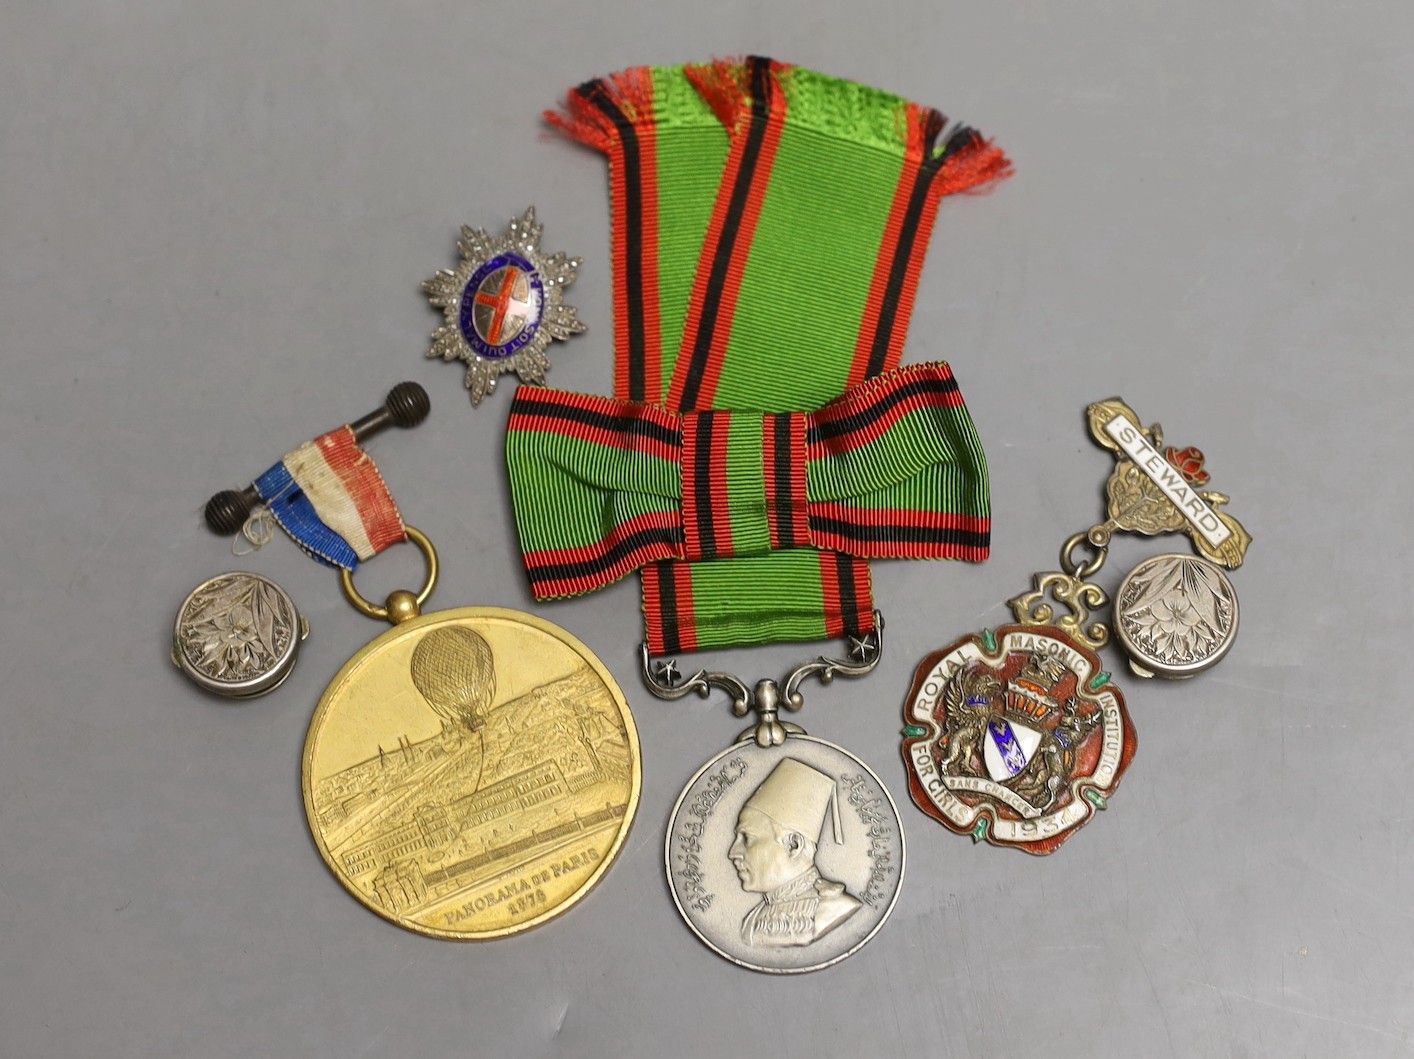 Five military badges and medals and buttons